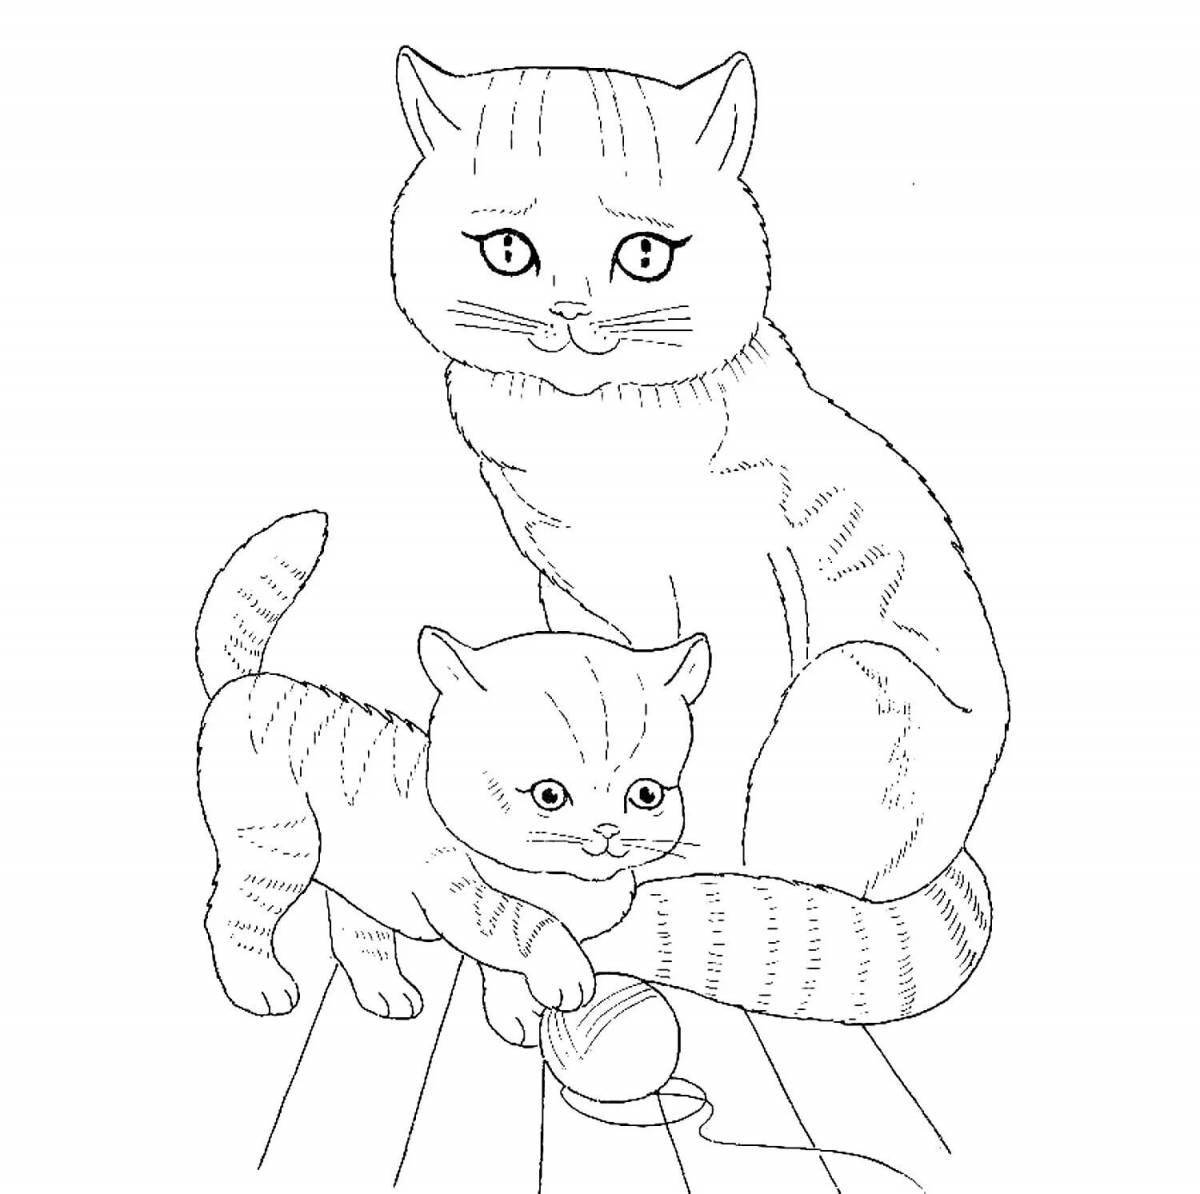 Violent coloring pages of pets for children 5-7 years old